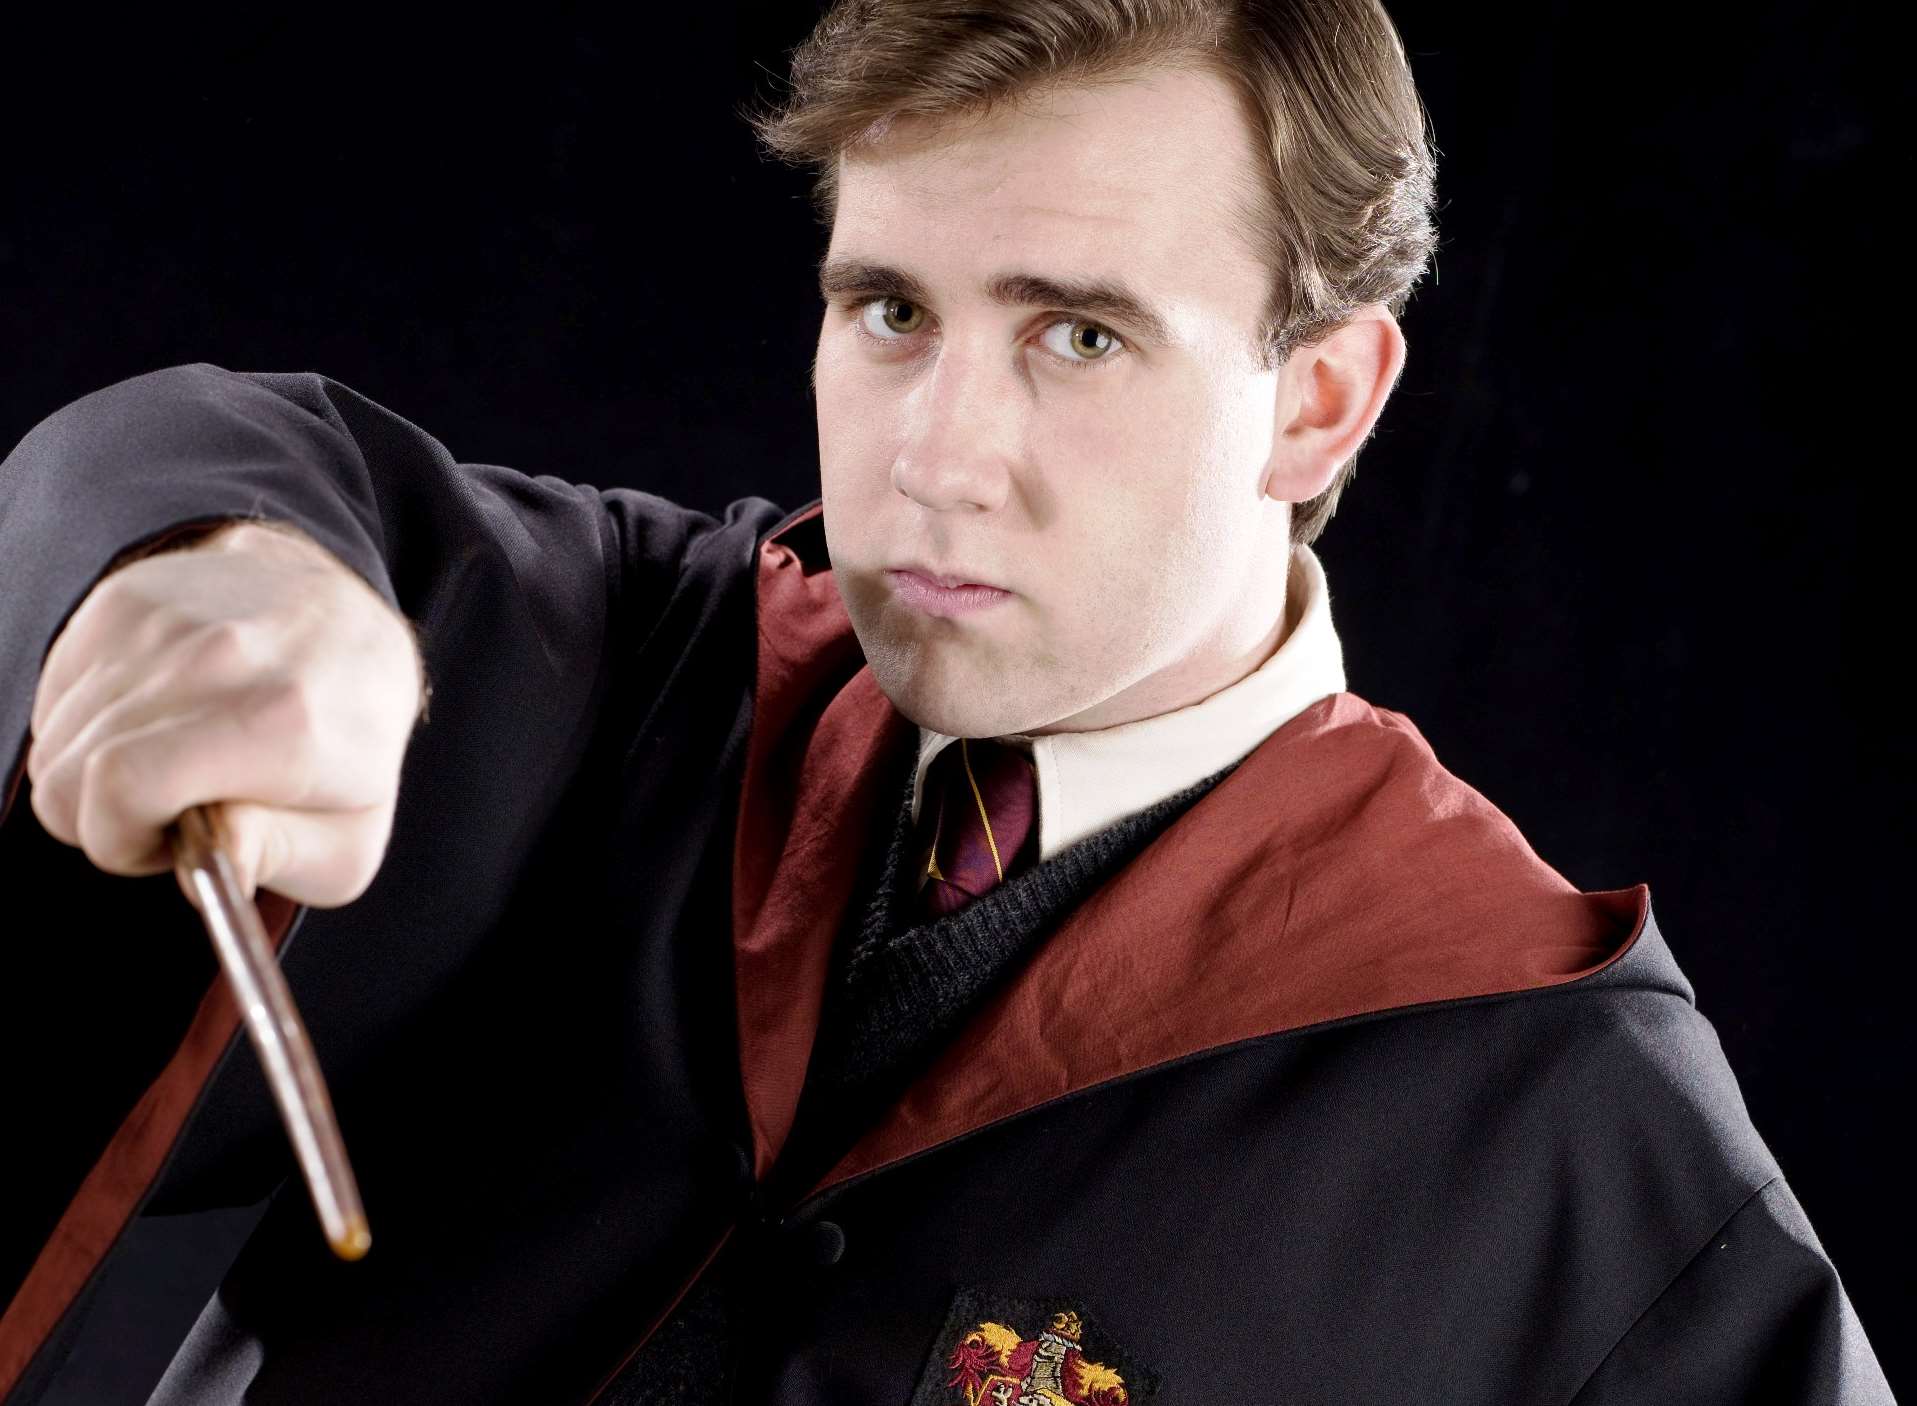 Matthew Lewis in costume as Neville Longbottom from the Harry Potter films